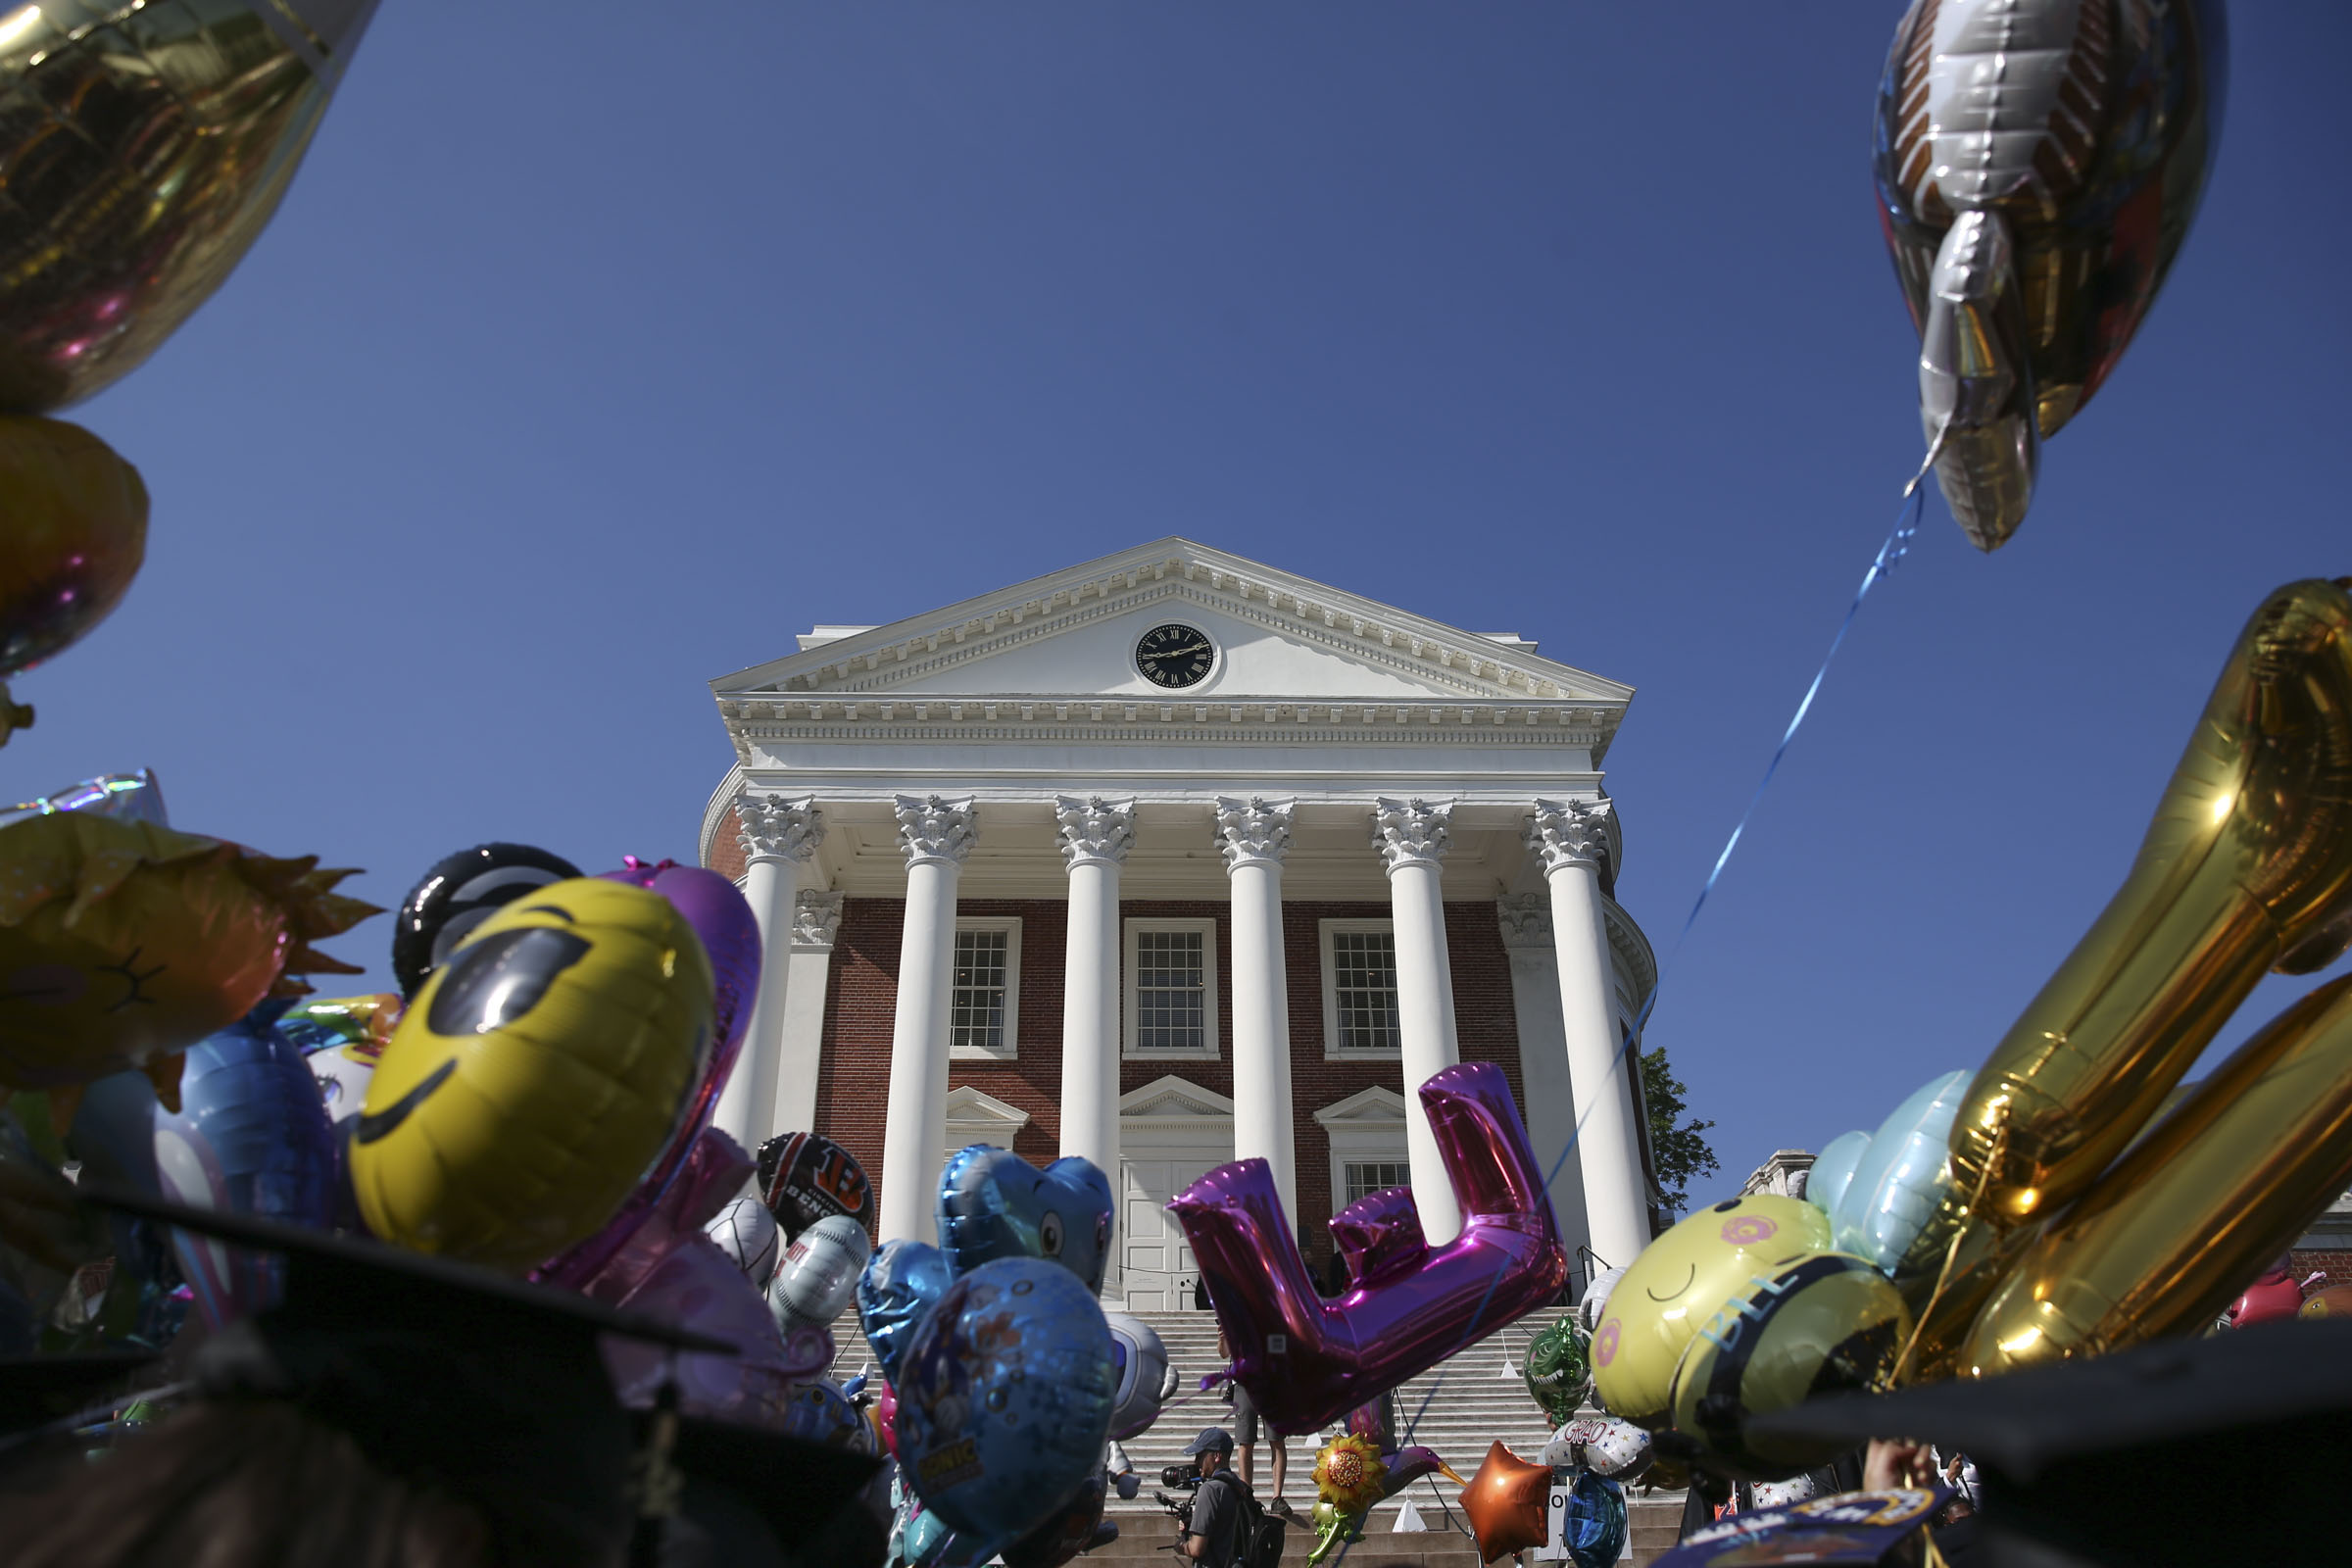 Colorful balloons frame the UVA Rotunda under clear, blue skies.